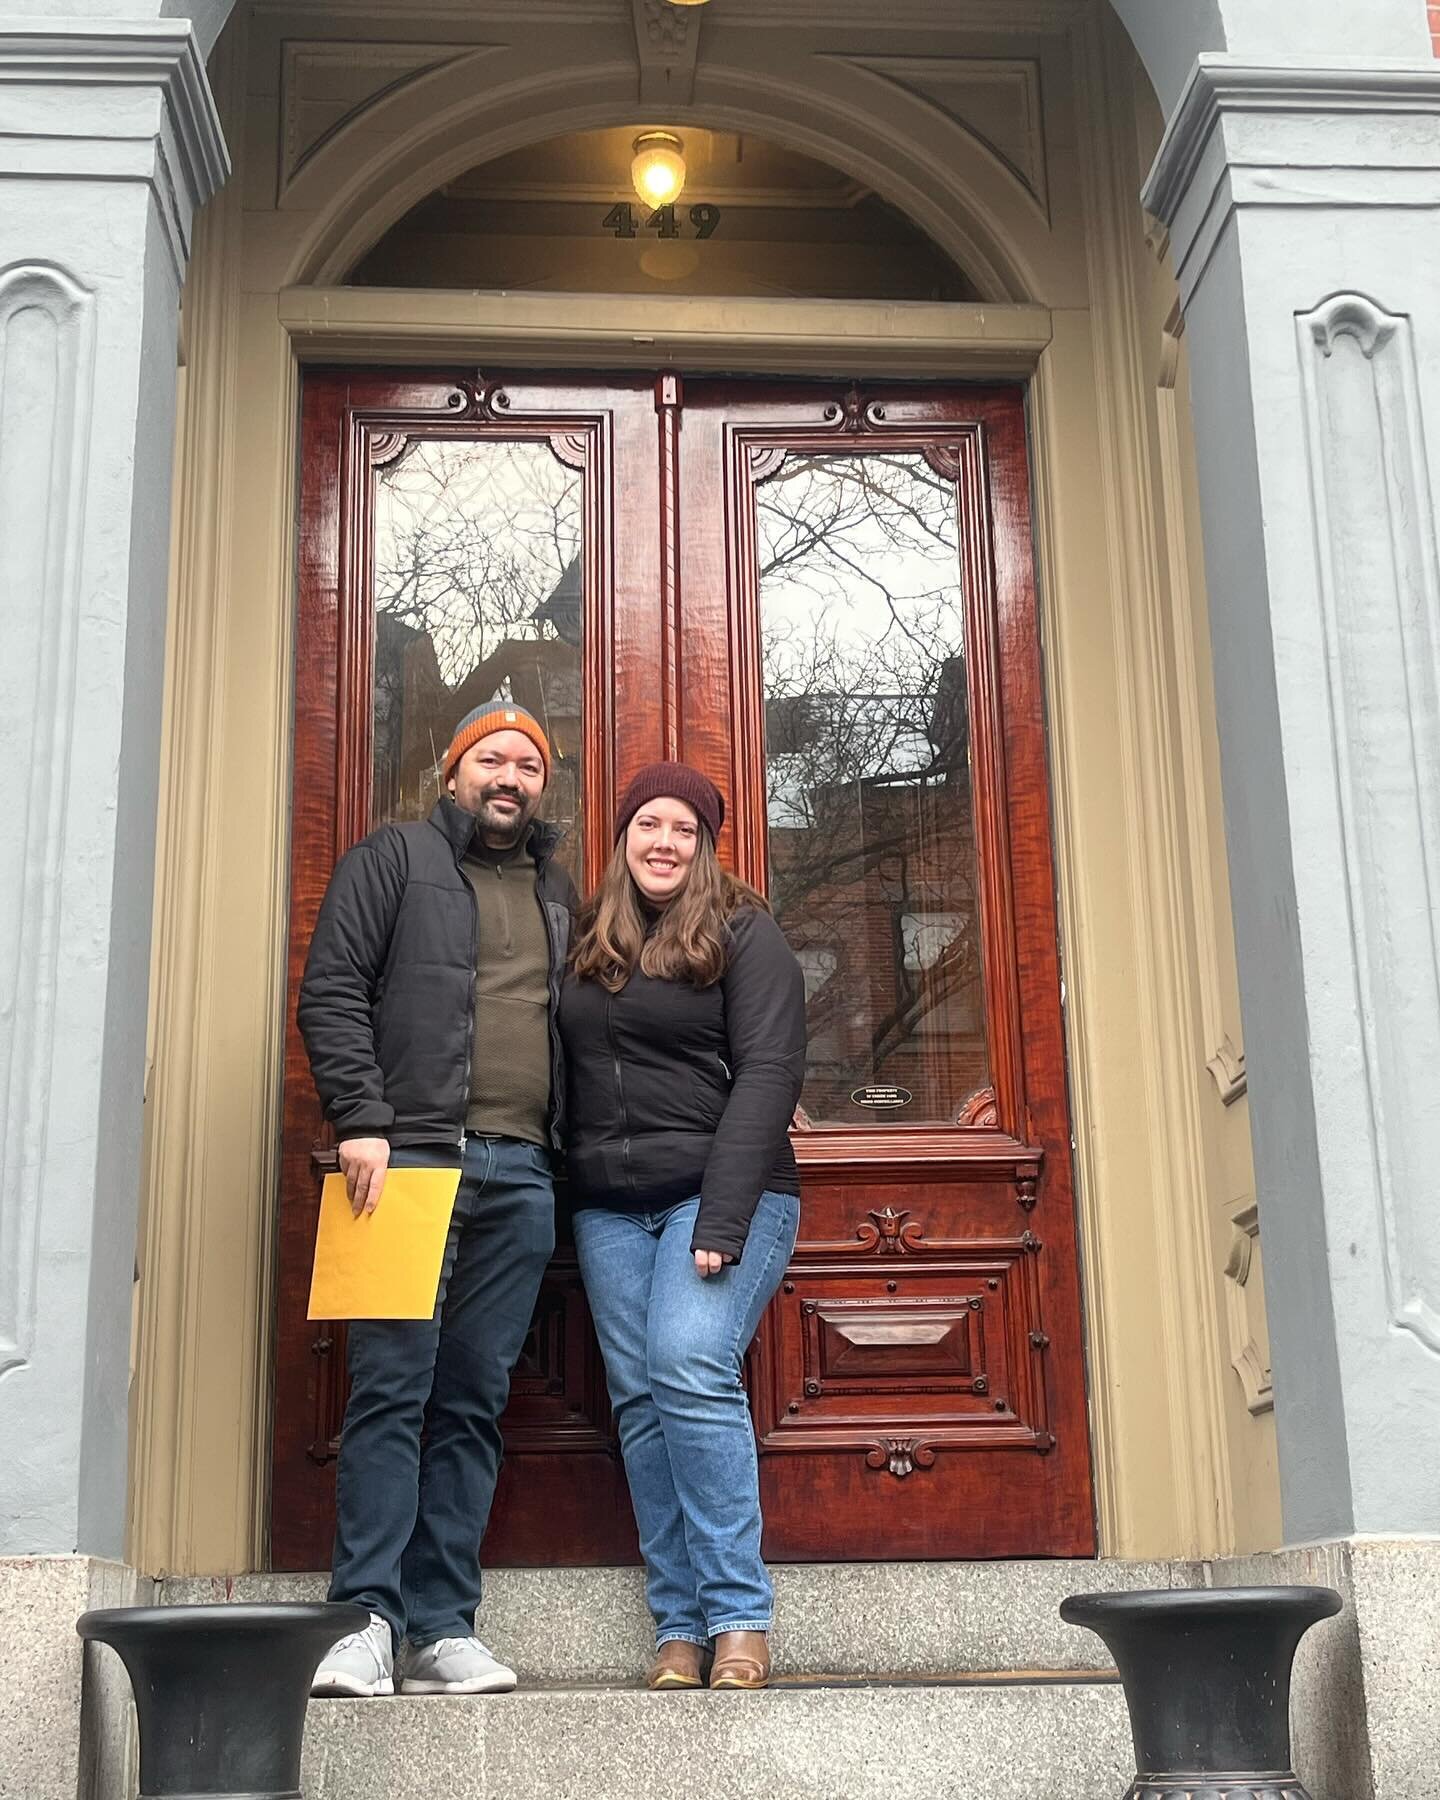 2024 is moving fast! Here&rsquo;s to our clients Patrick and Marissa who scored a jaw dropping S End condo one month ago today. We couldn&rsquo;t be more excited for them and can&rsquo;t wait to see what transformations take place! 🎉👏🥂